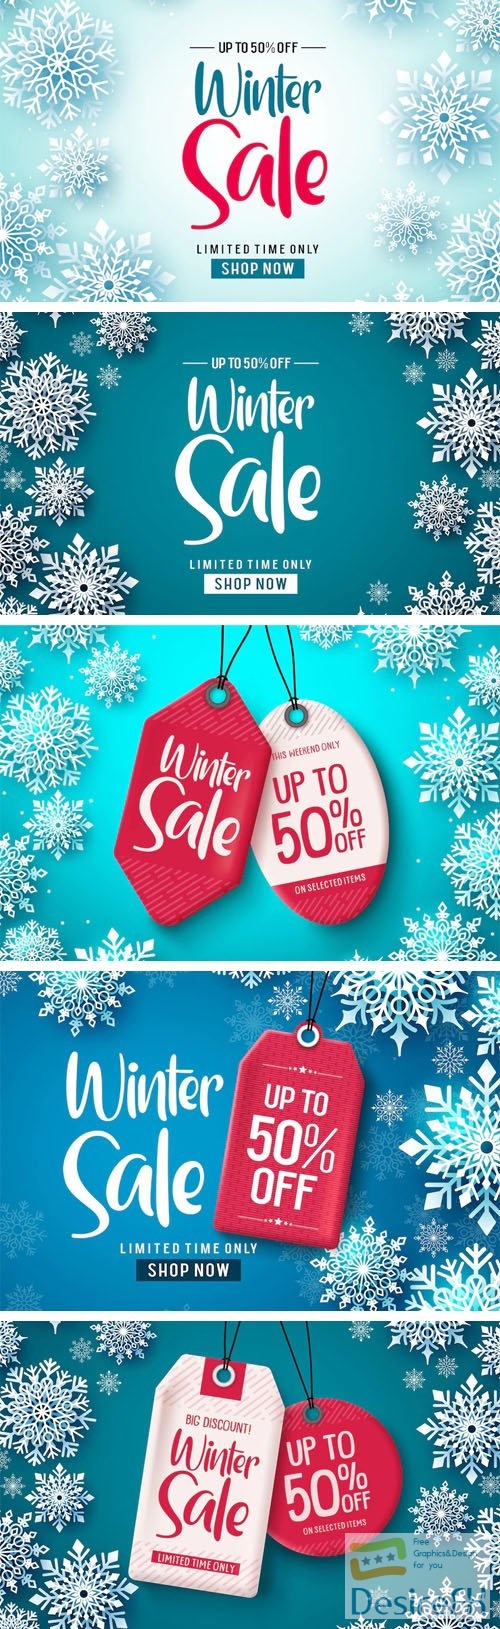 Winter Sales Banners & Backgrounds Vector Templates Collection